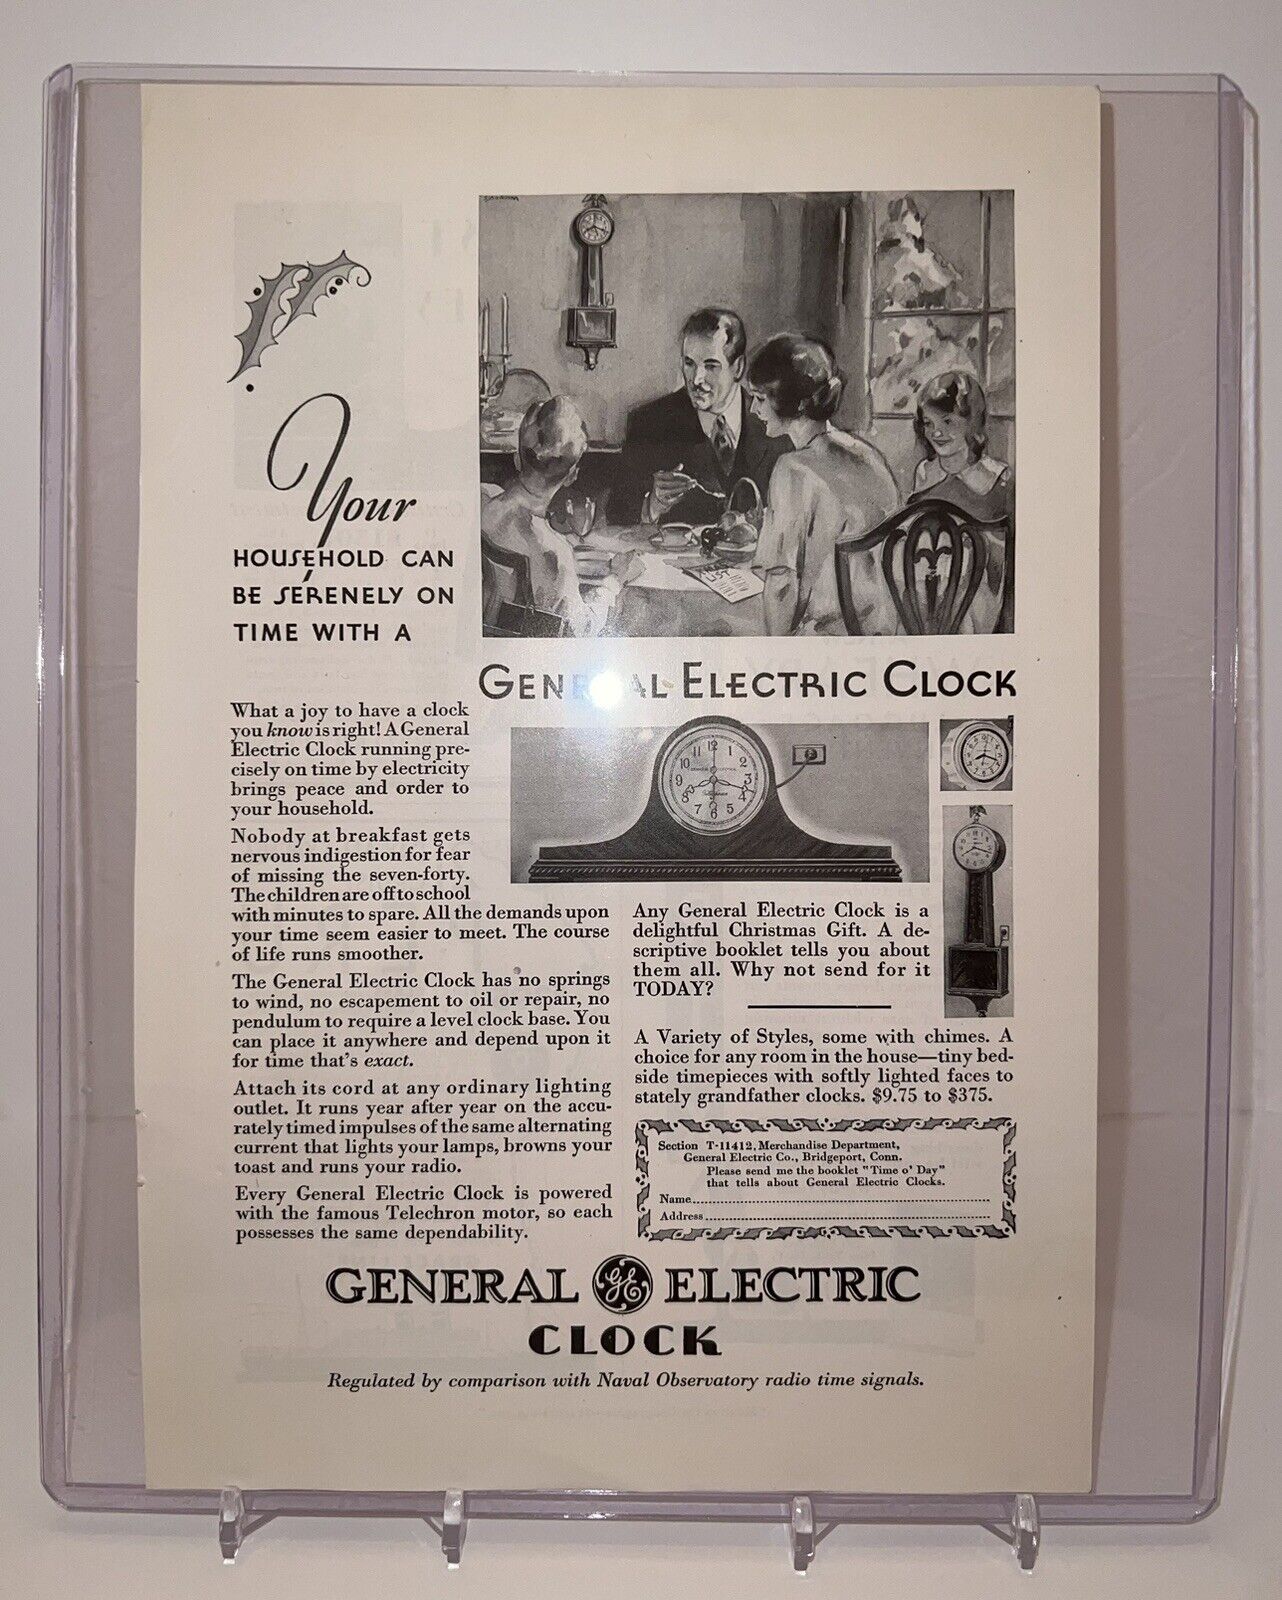 Vintage Original 1930 General Electric Clock A Delightful Christmas Gift Ad